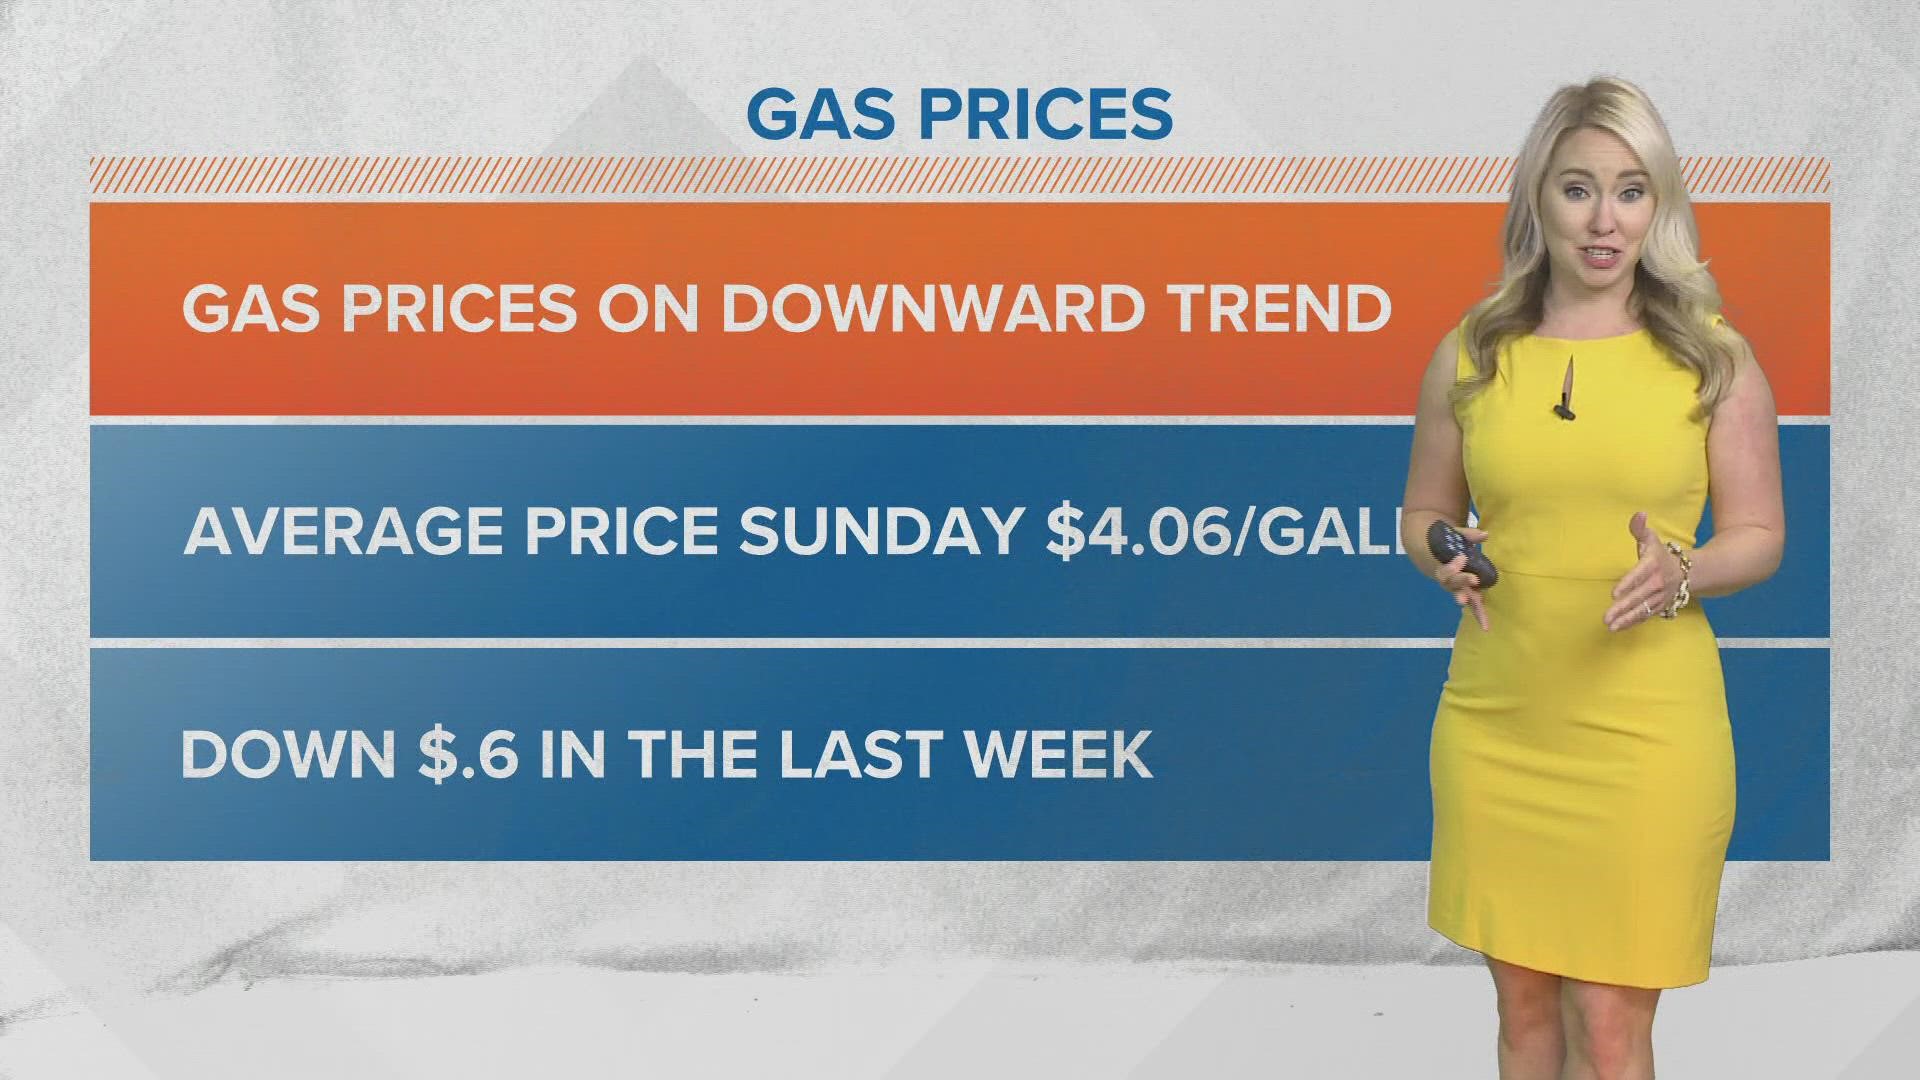 With the price of oil rebounding, you can expect the downward trend to start leveling out.